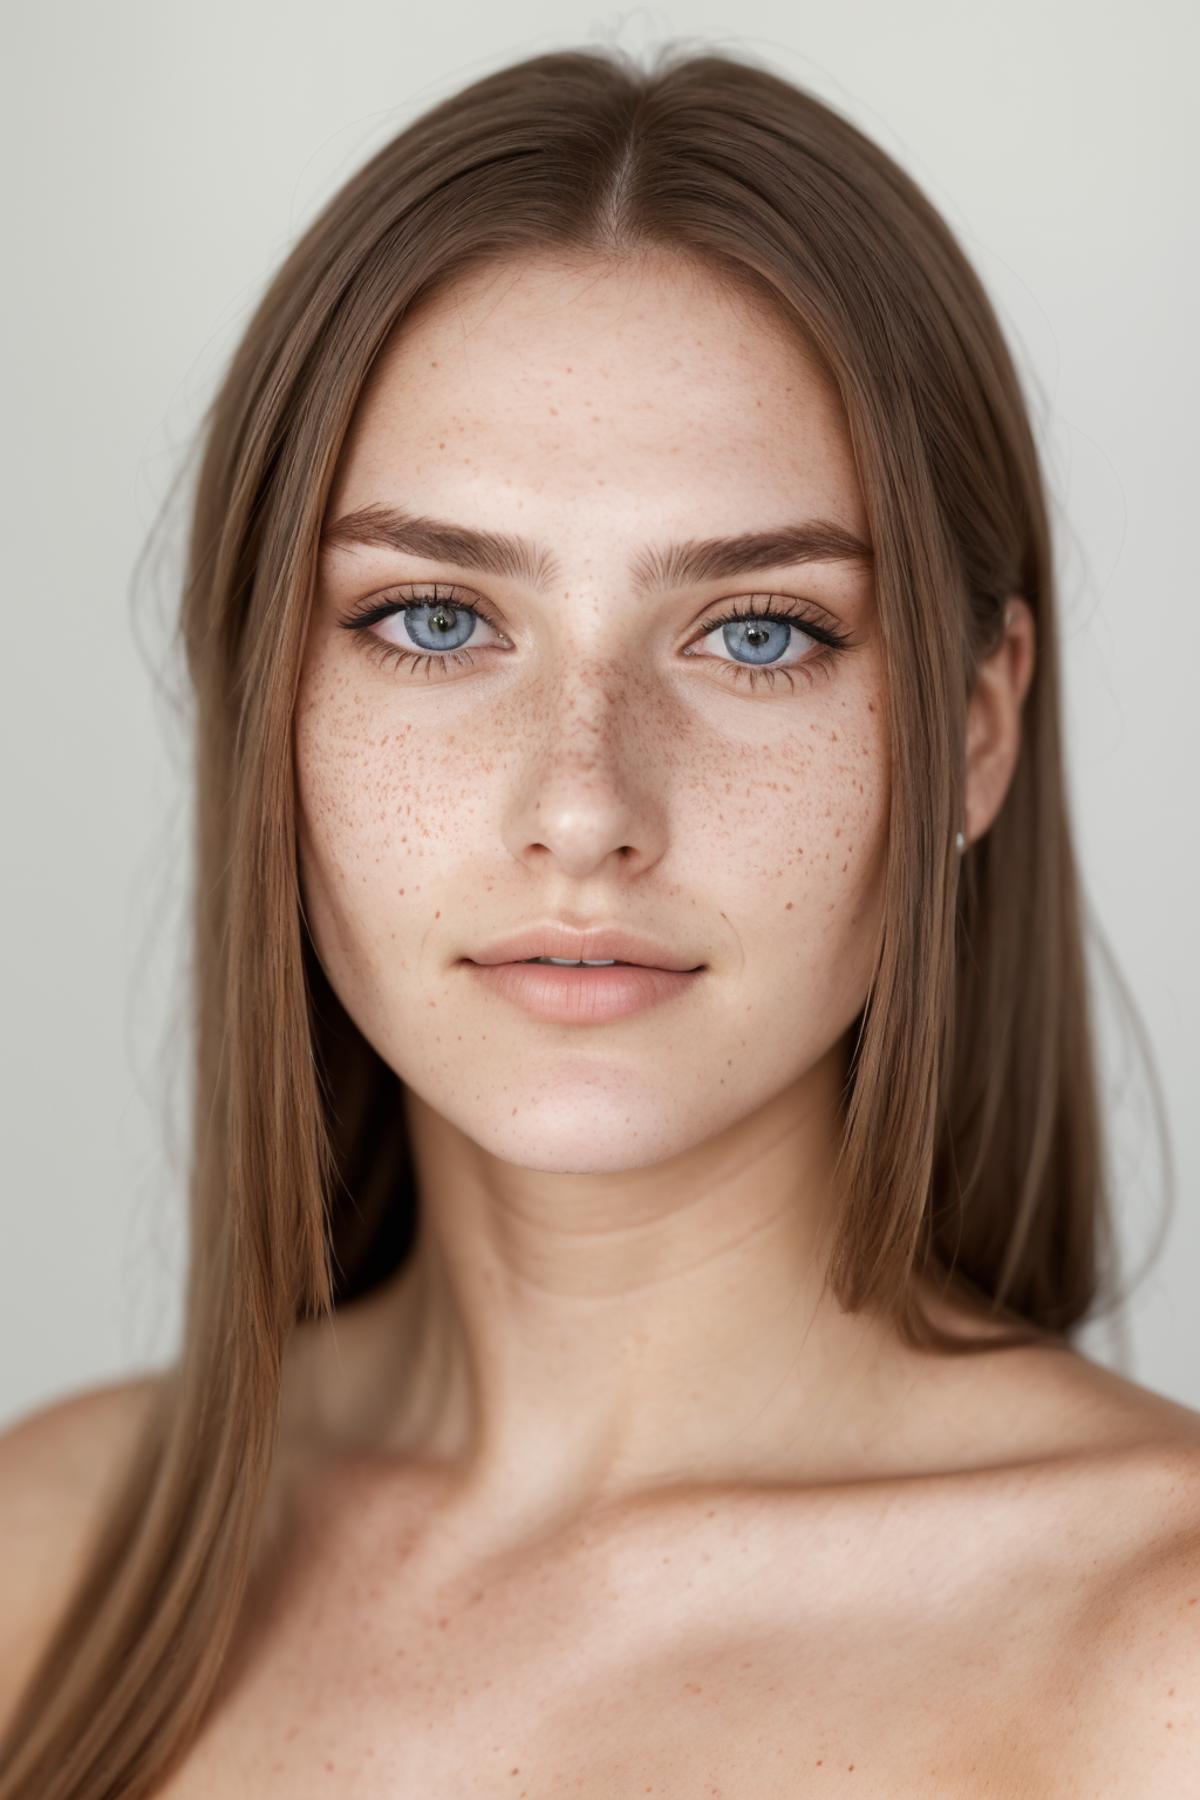 A close-up of a woman with blue eyes and freckles on her face.